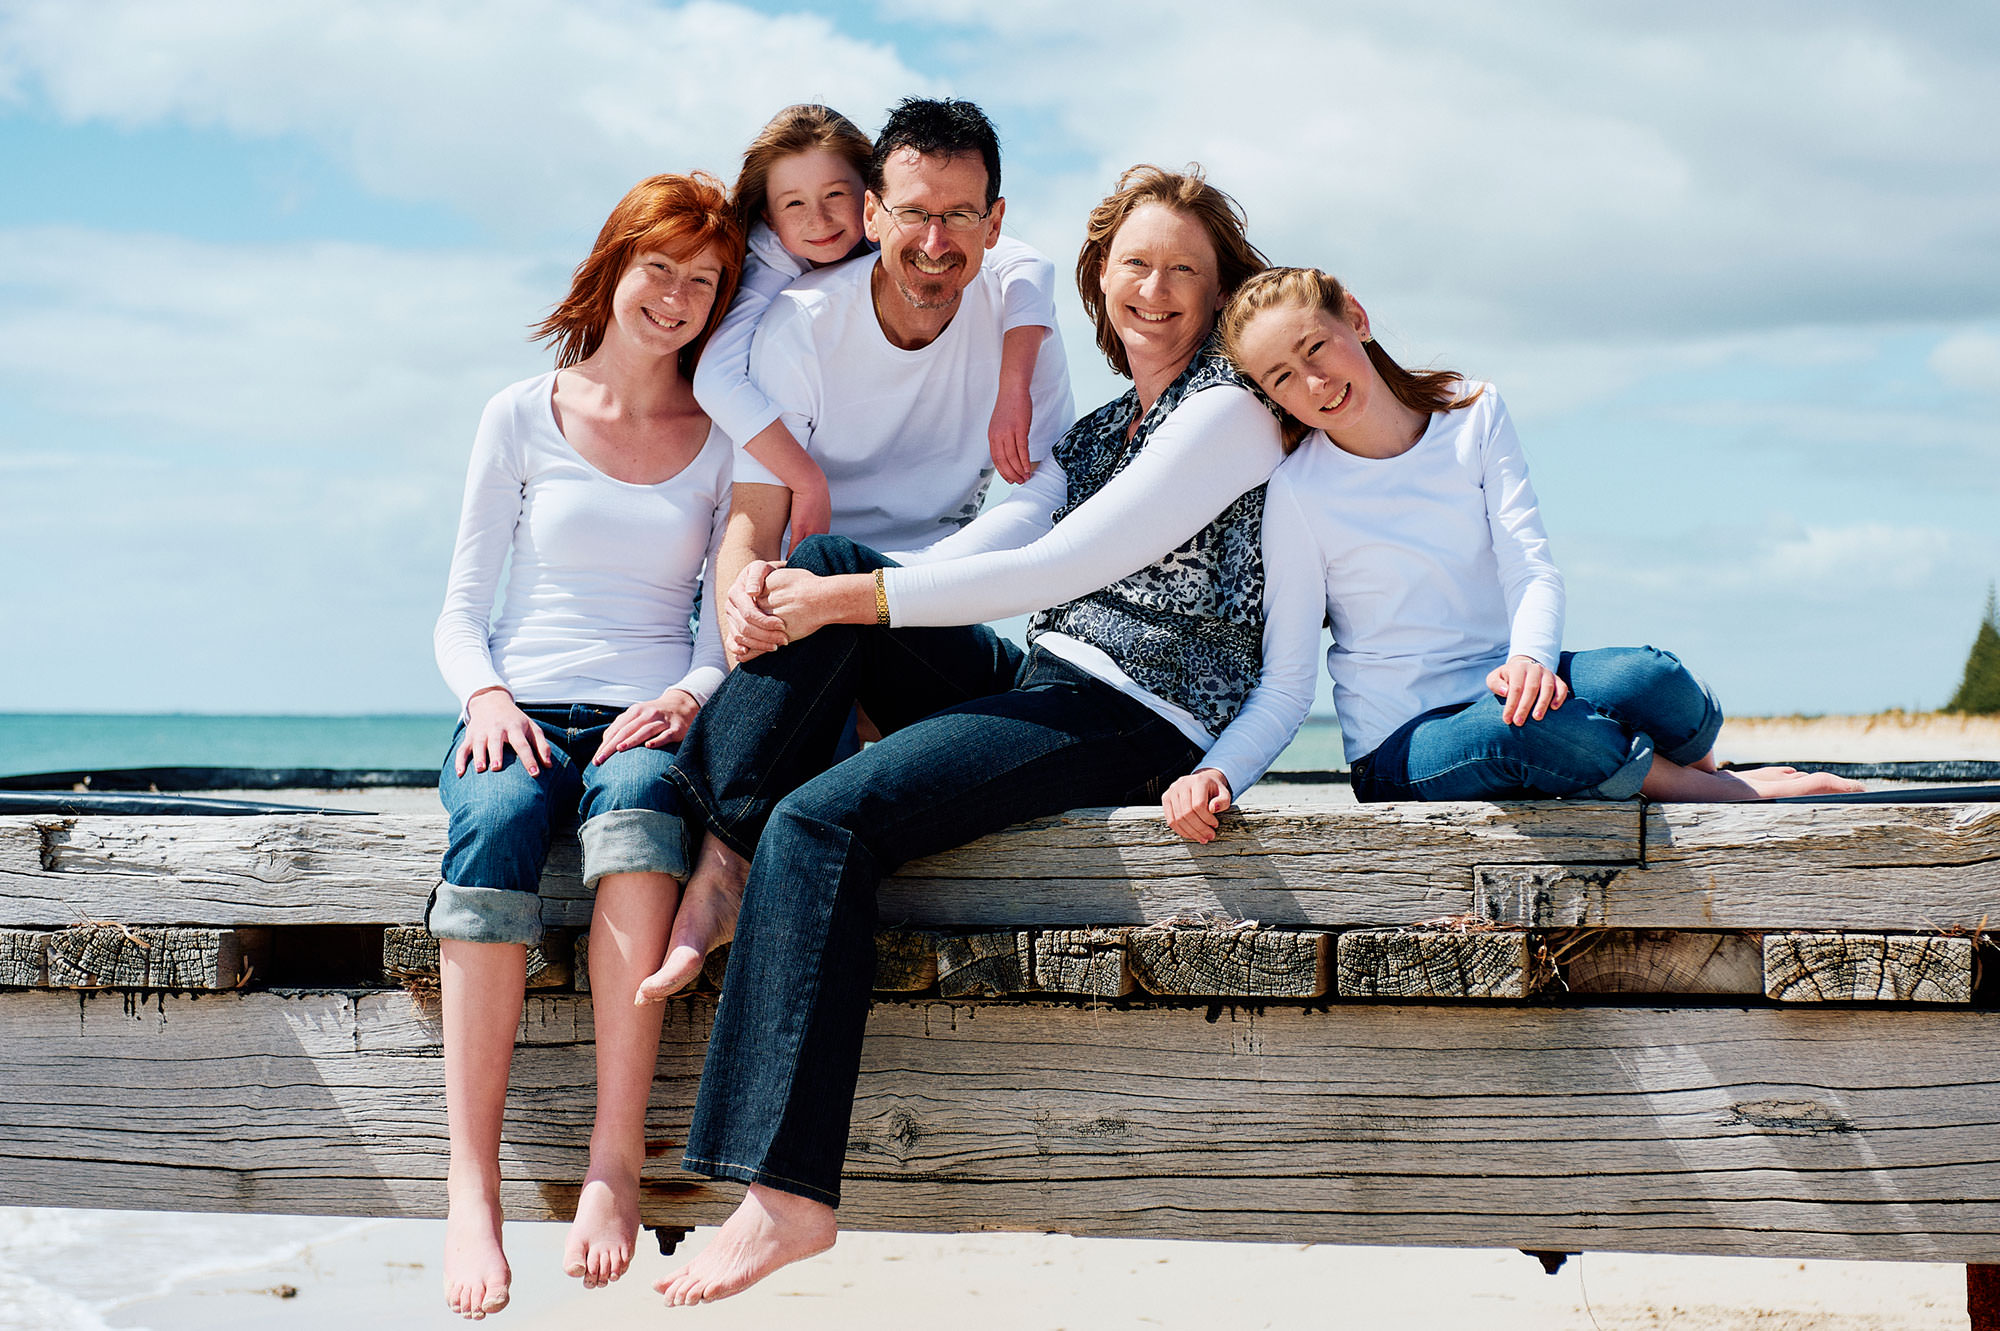 Busselton Portrait session: Brian, Shelley and and family